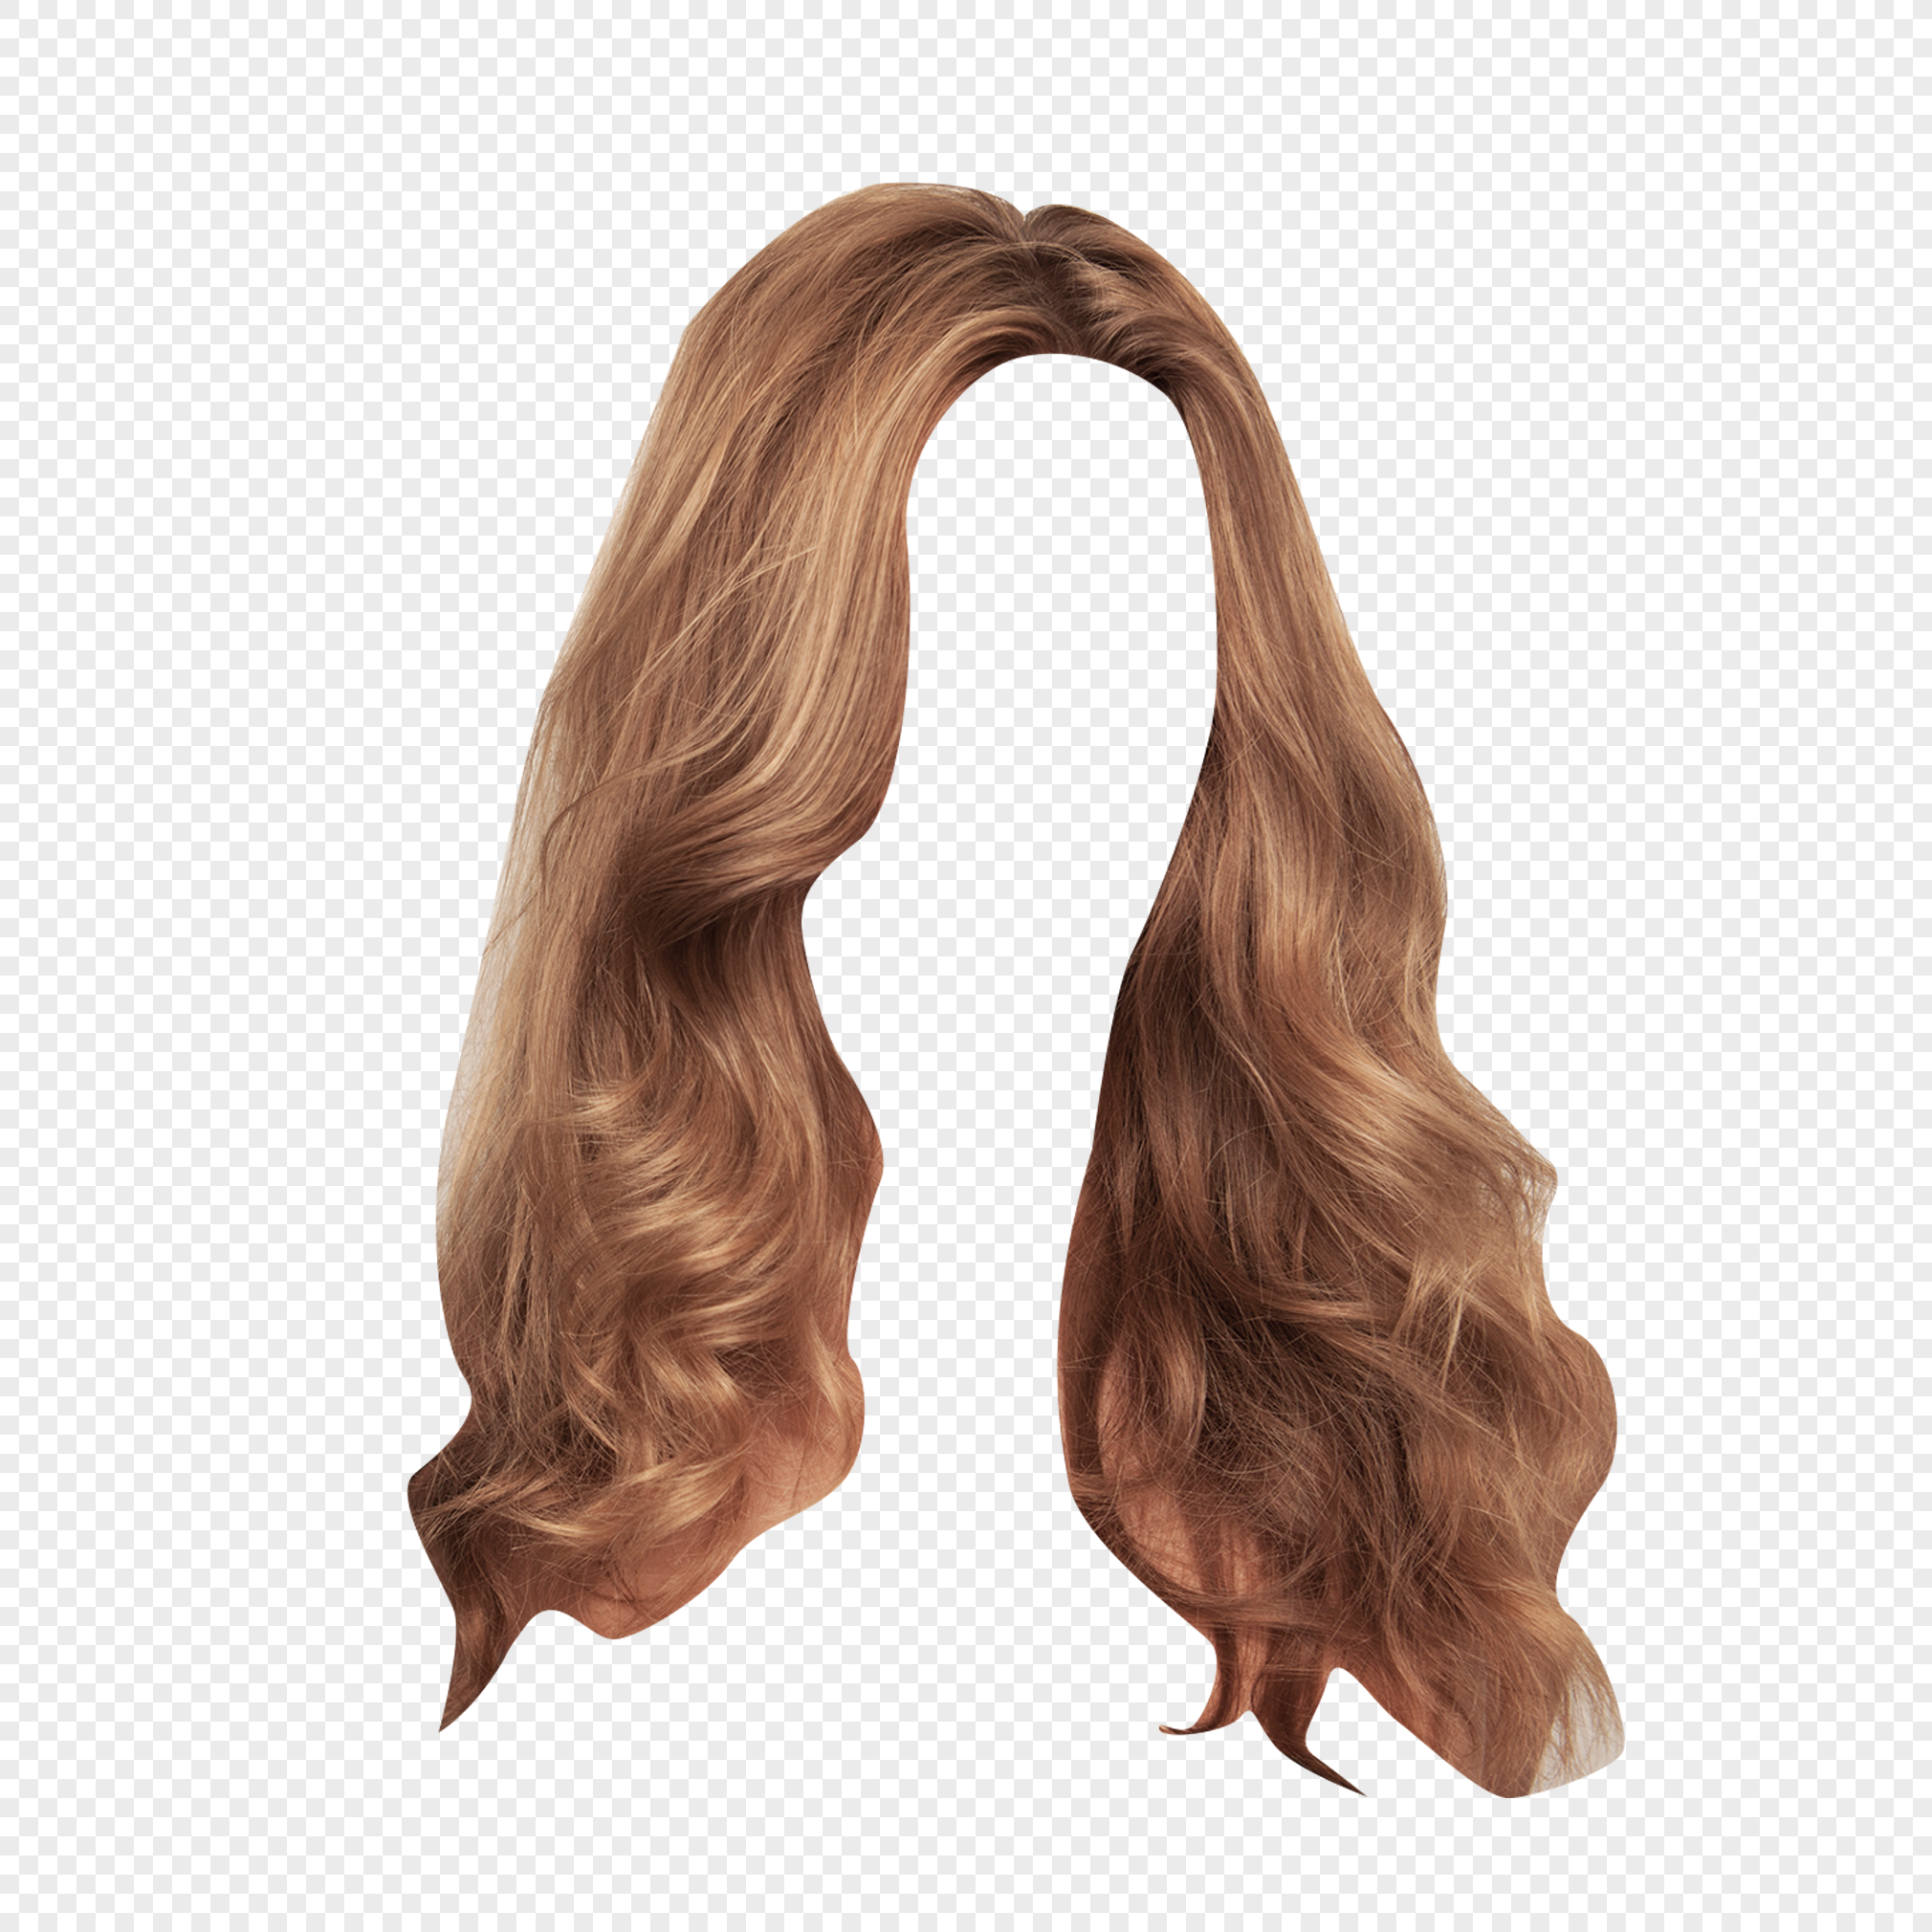 Blond Hair PNG Images With Transparent Background | Free Download On Lovepik